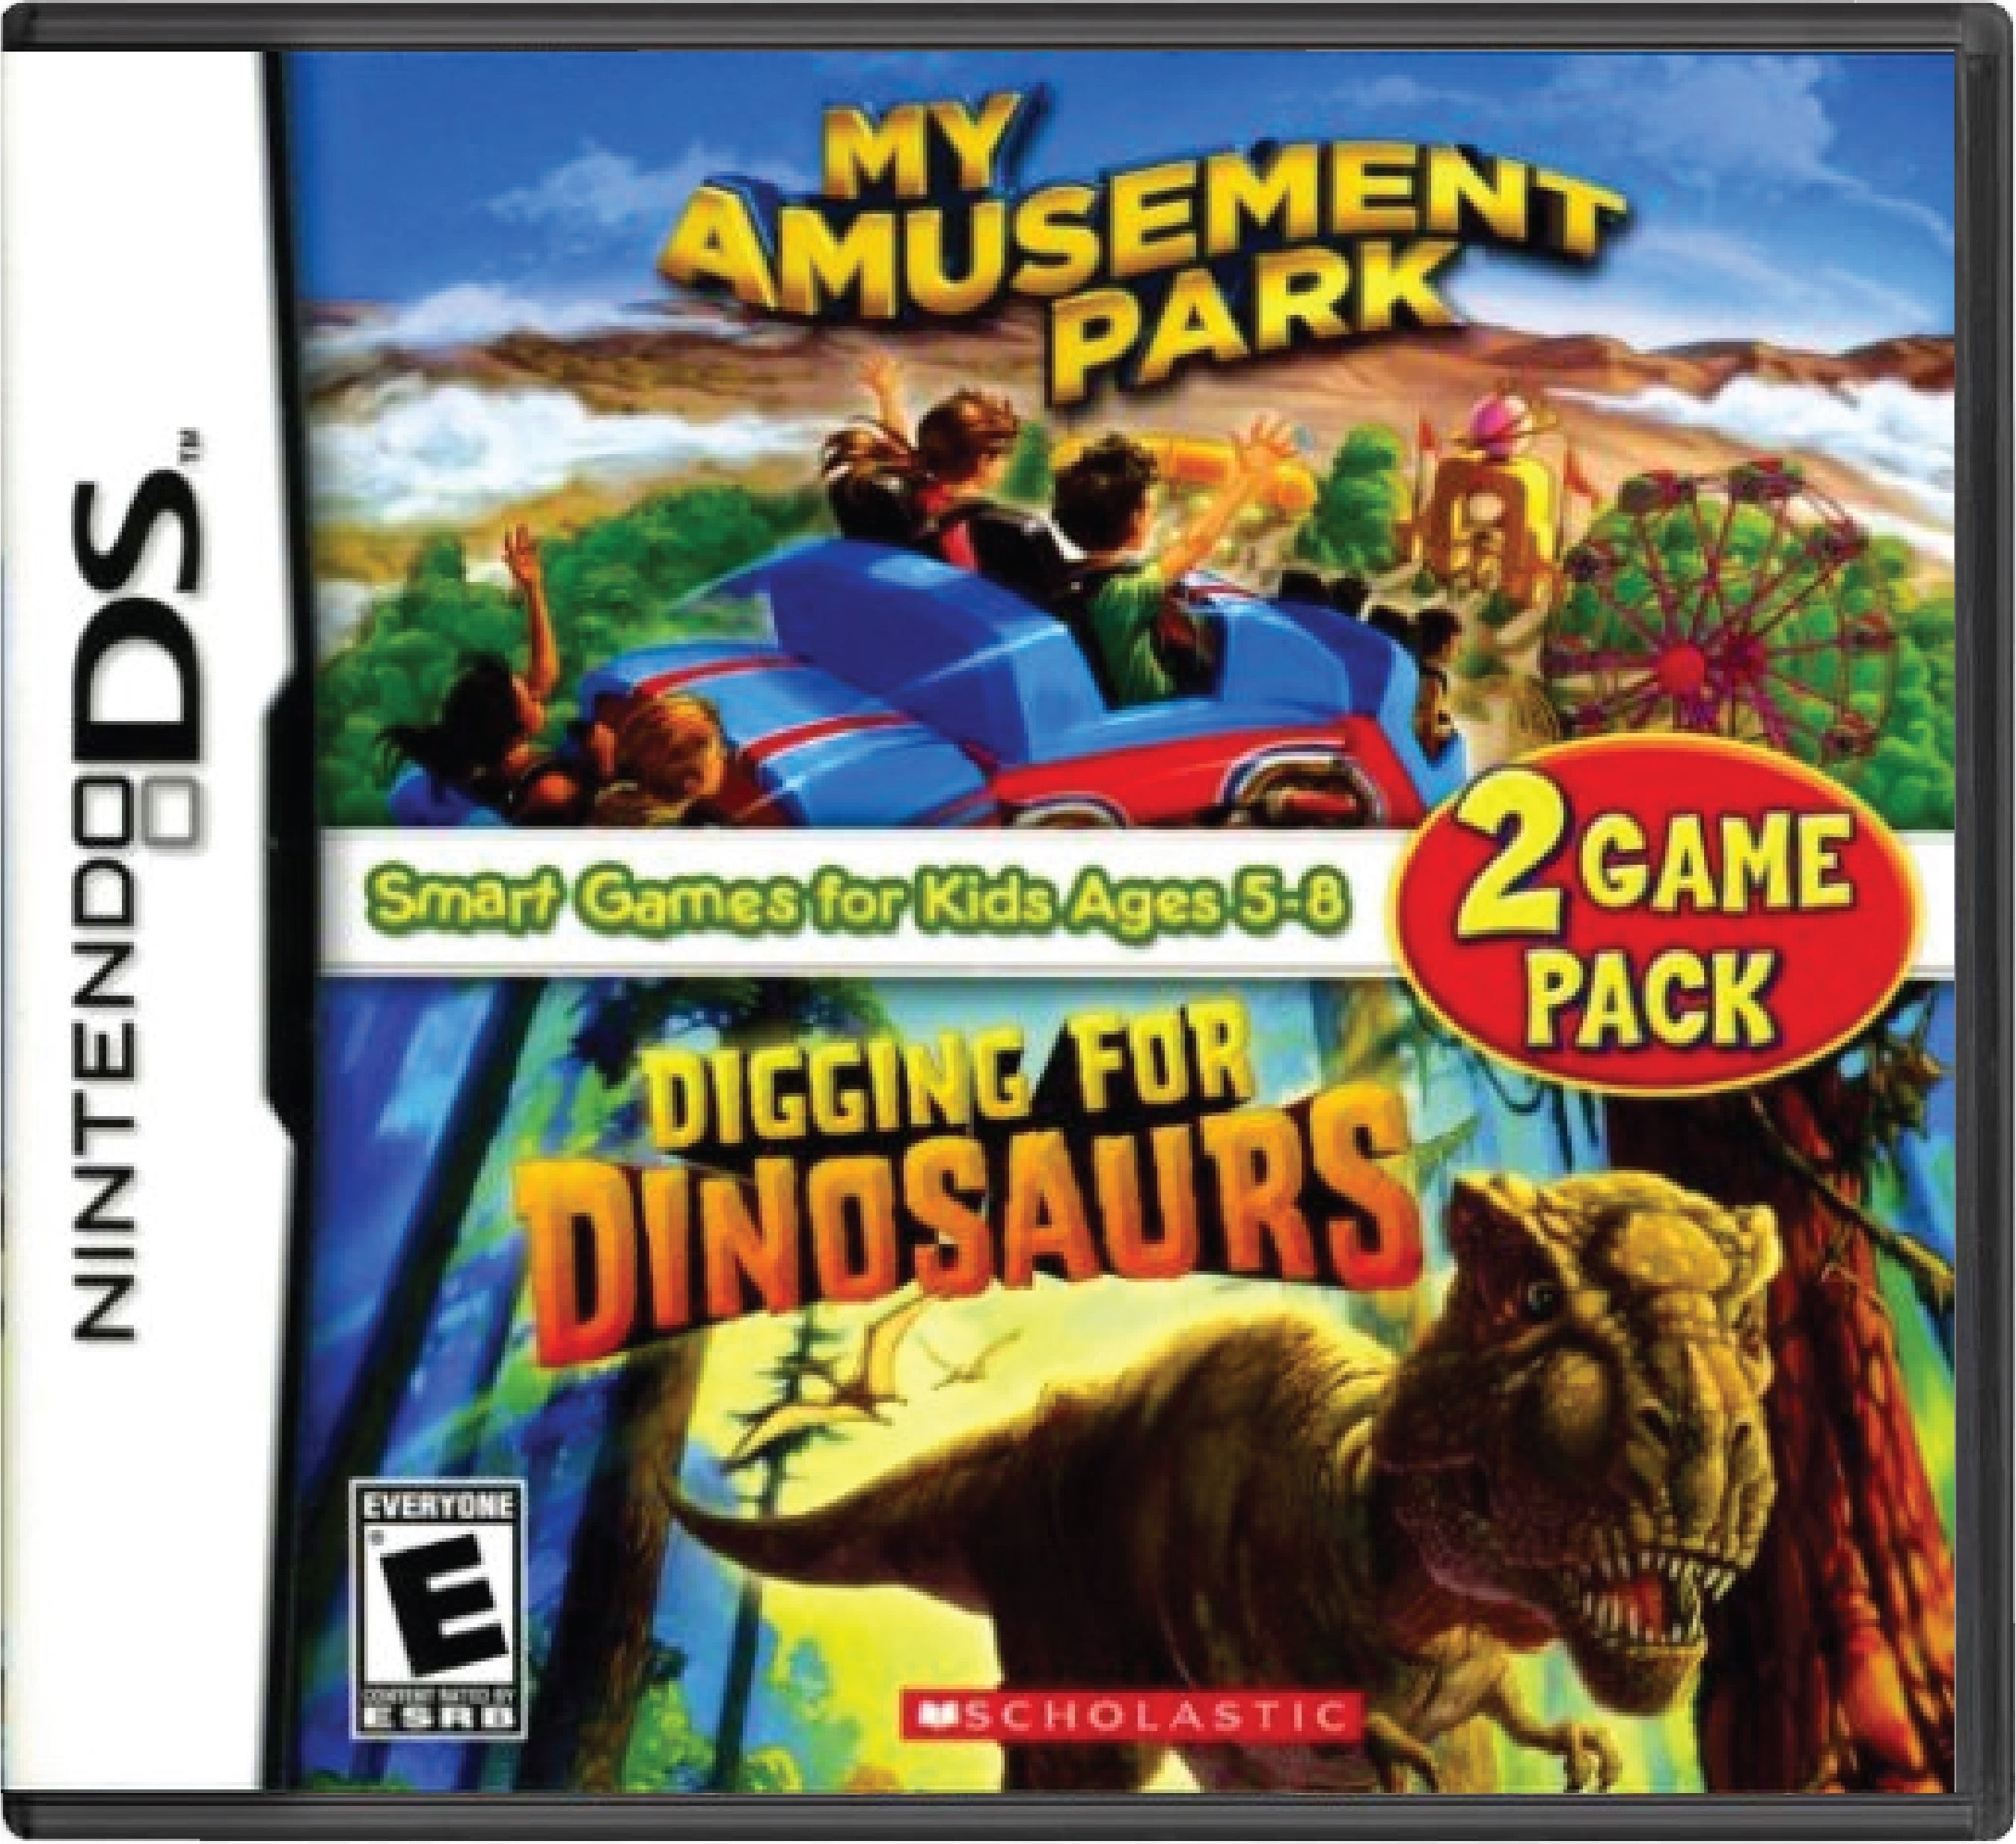 2 Game Pack My Amusement Park & Digging for Dinosaurs Cover Art